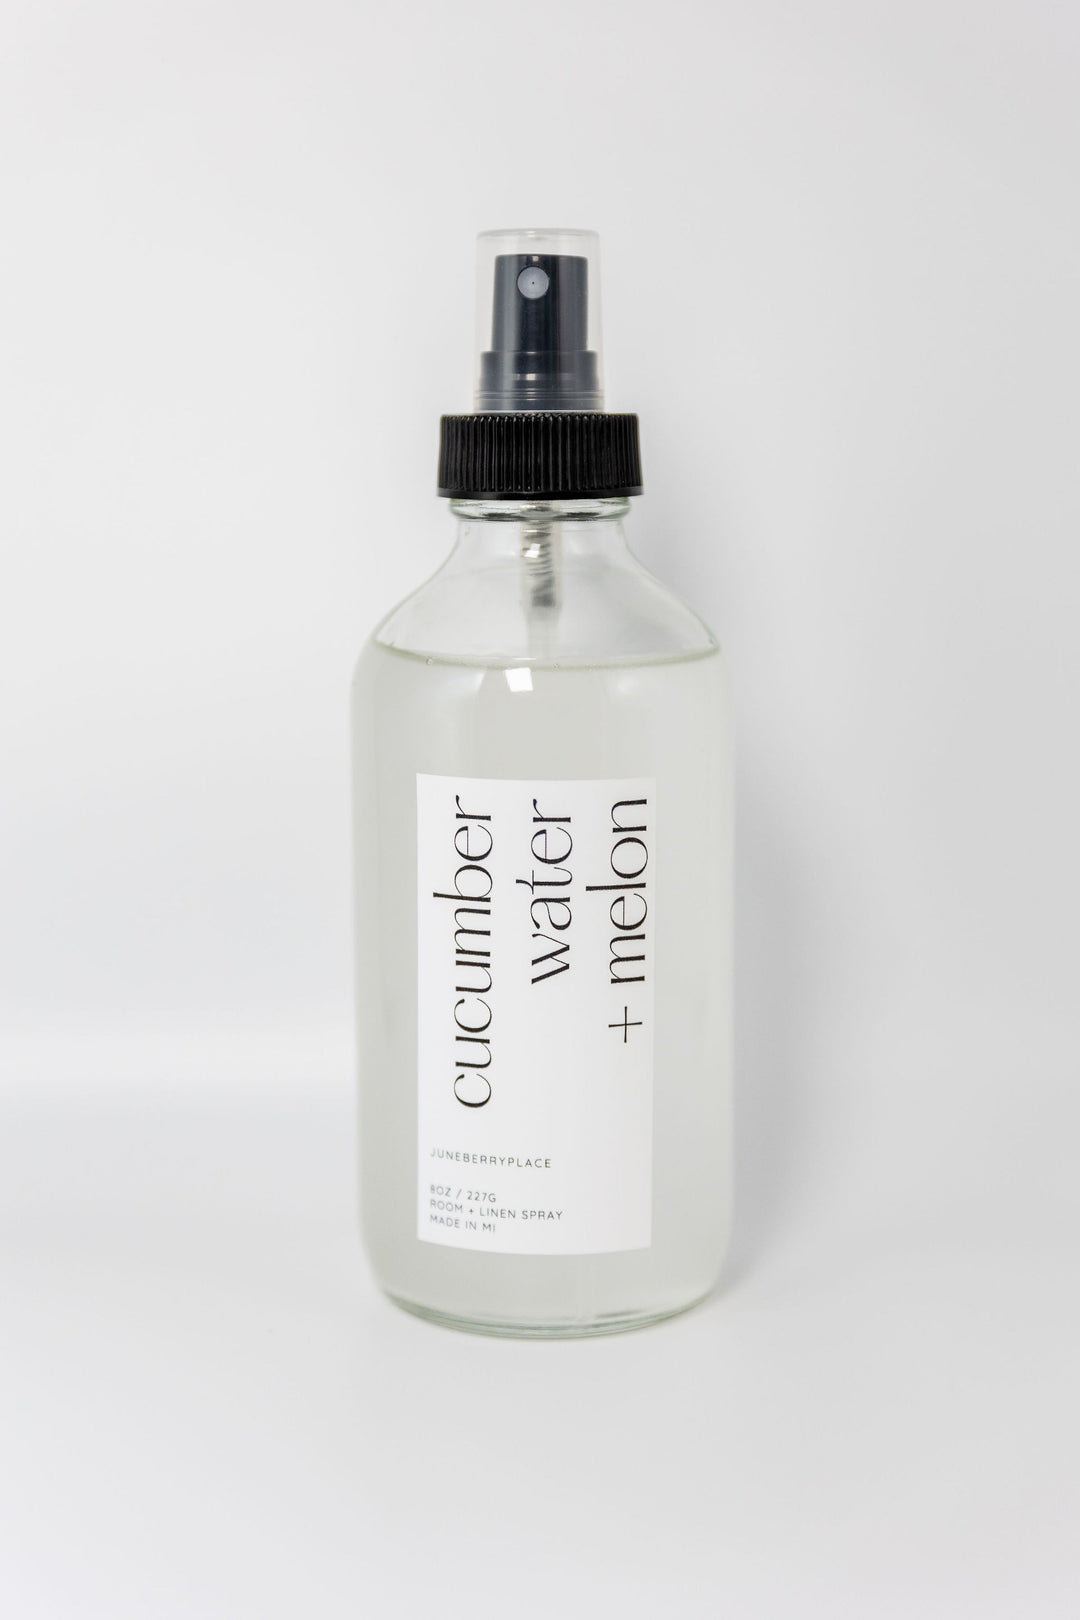 Cucumber Water and Melon Room and Linen Spray - Spring Collection in a glass bottle by juneberryplace home fragrances